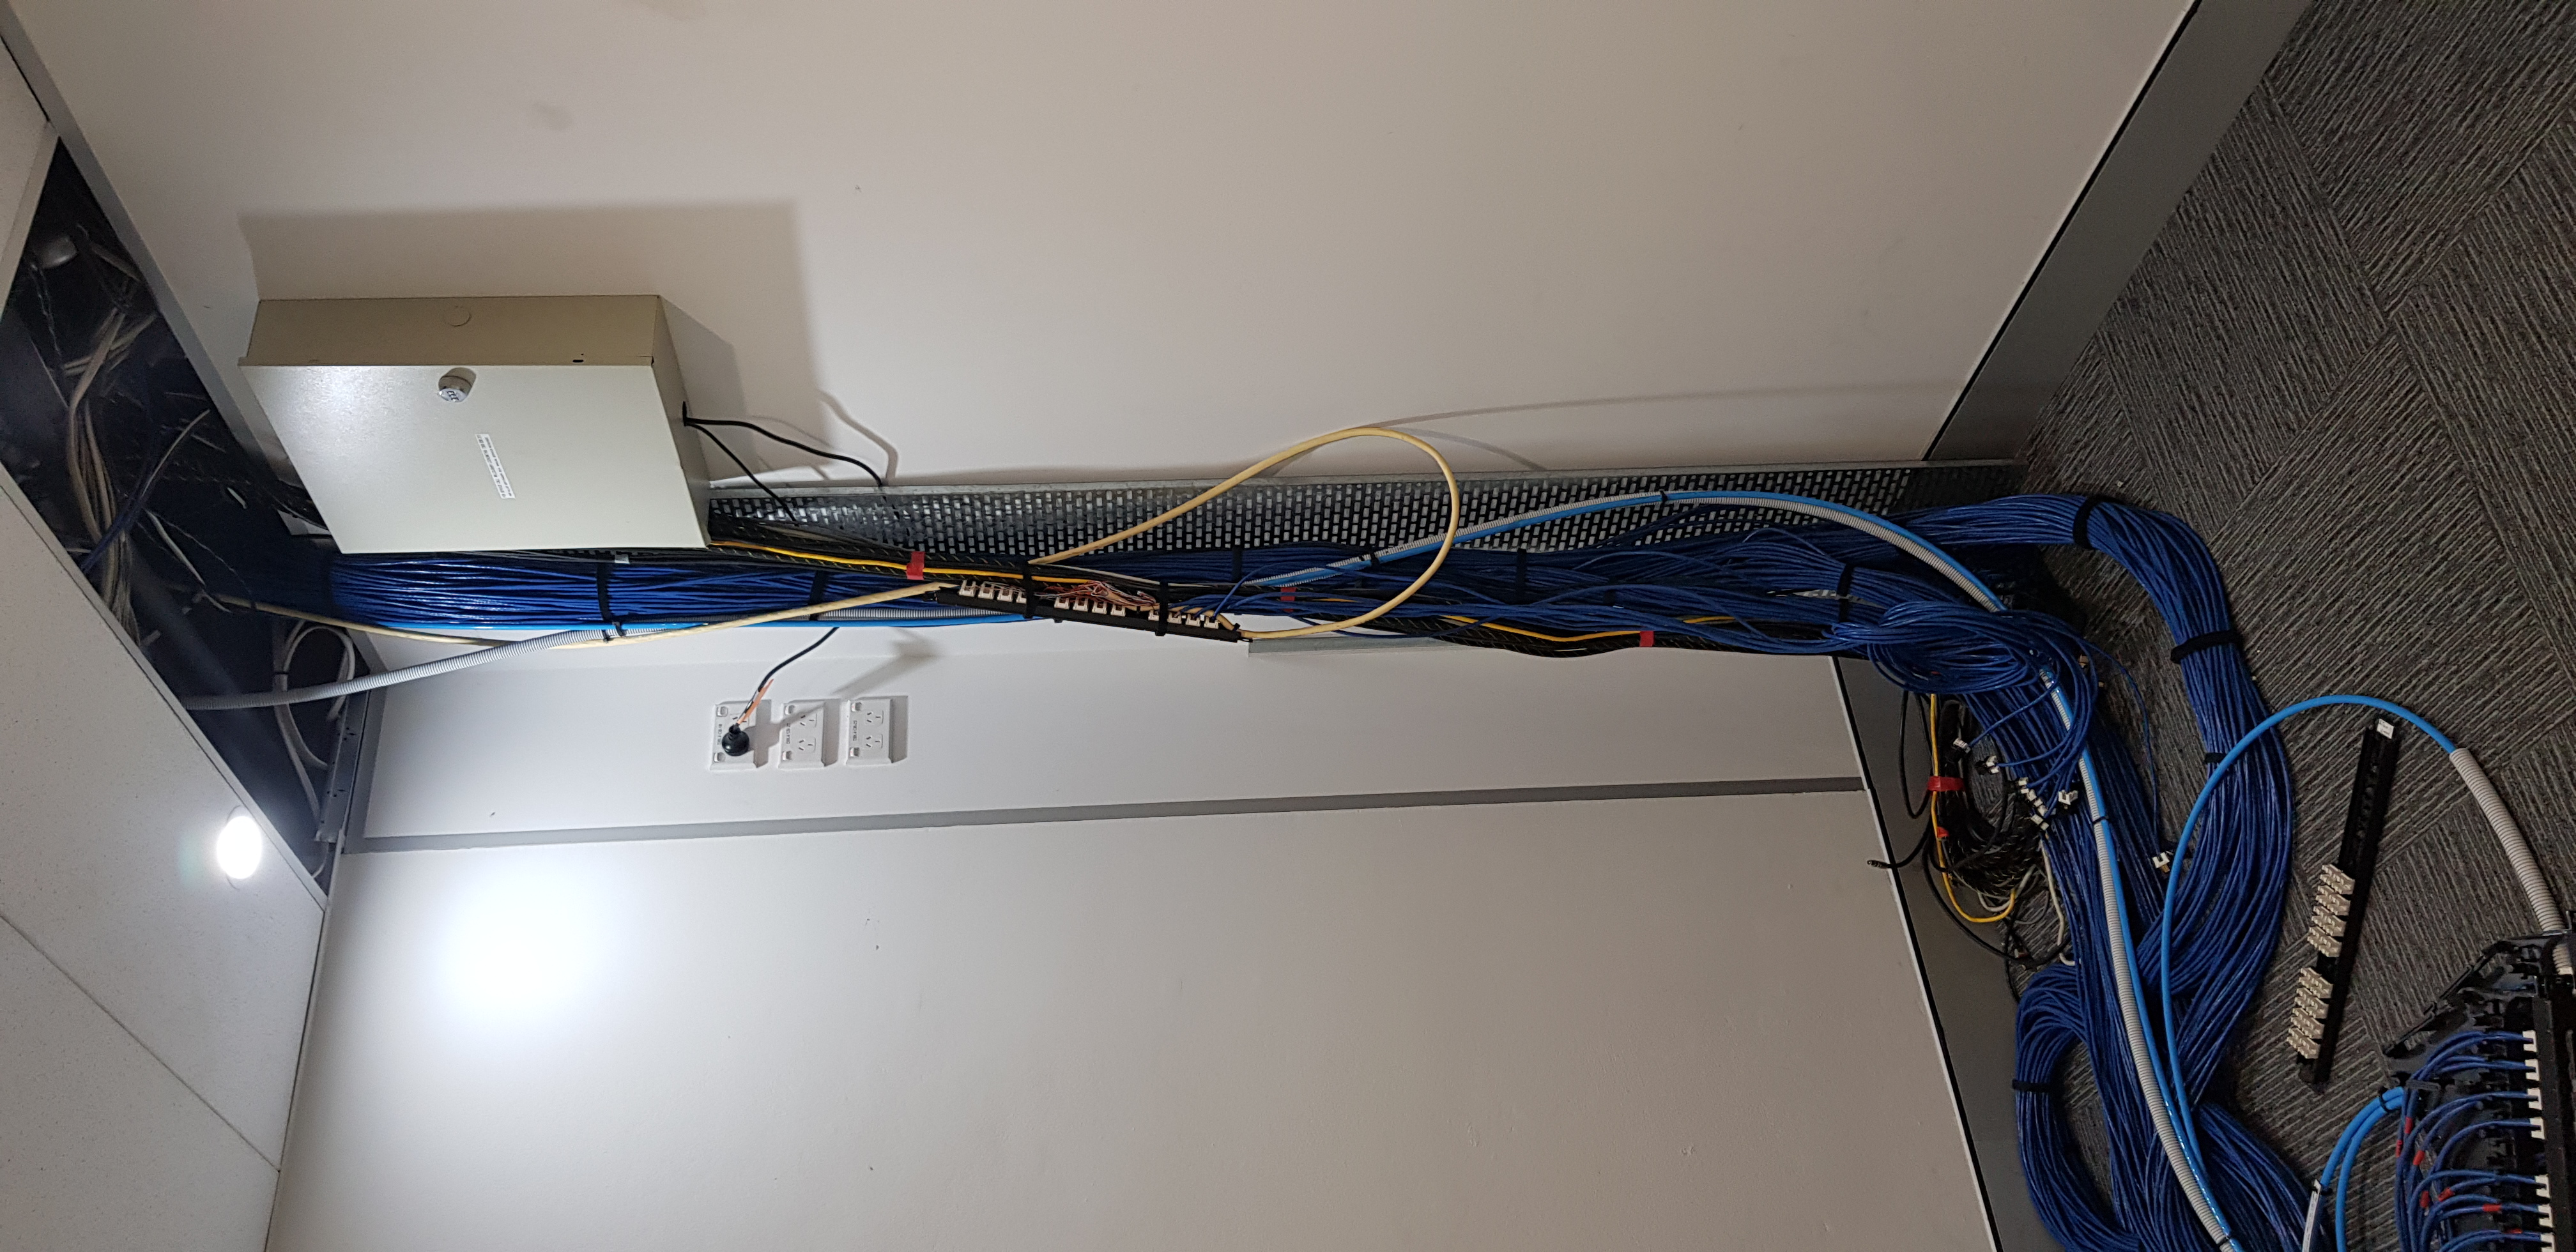 Office data cabling Terminated